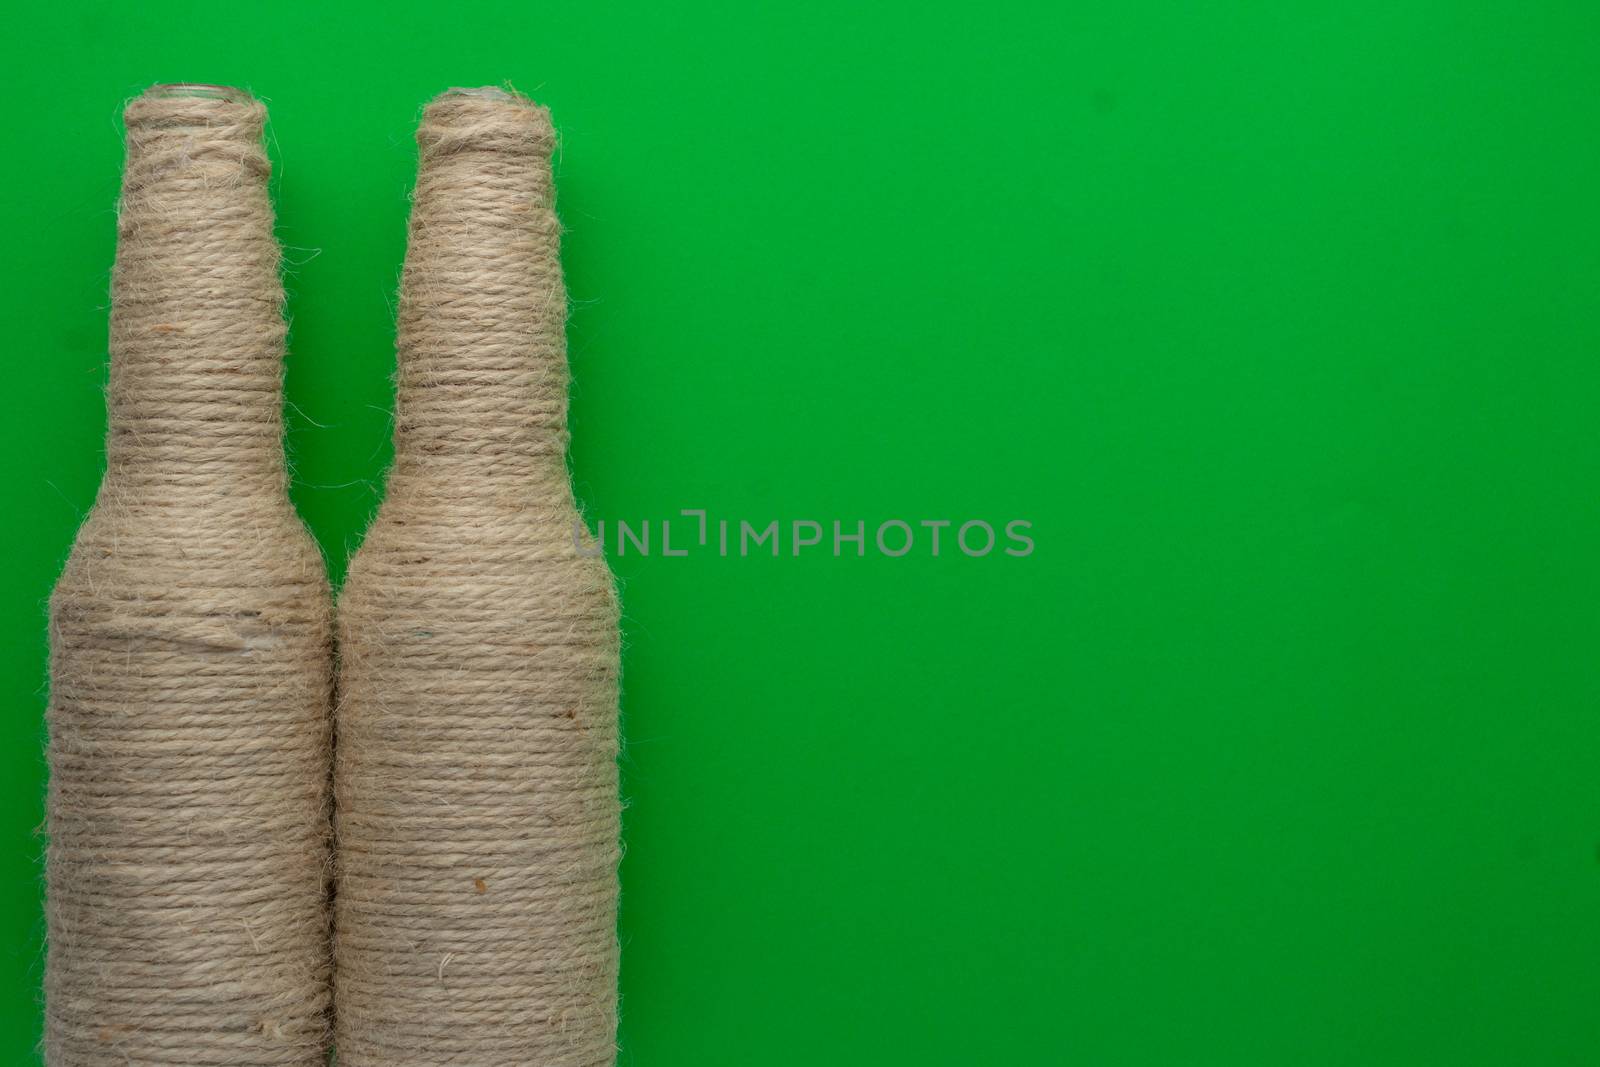 Two glass bottles of beer reused with hemp yarn on the left with a green background. Recycling and reusable concept